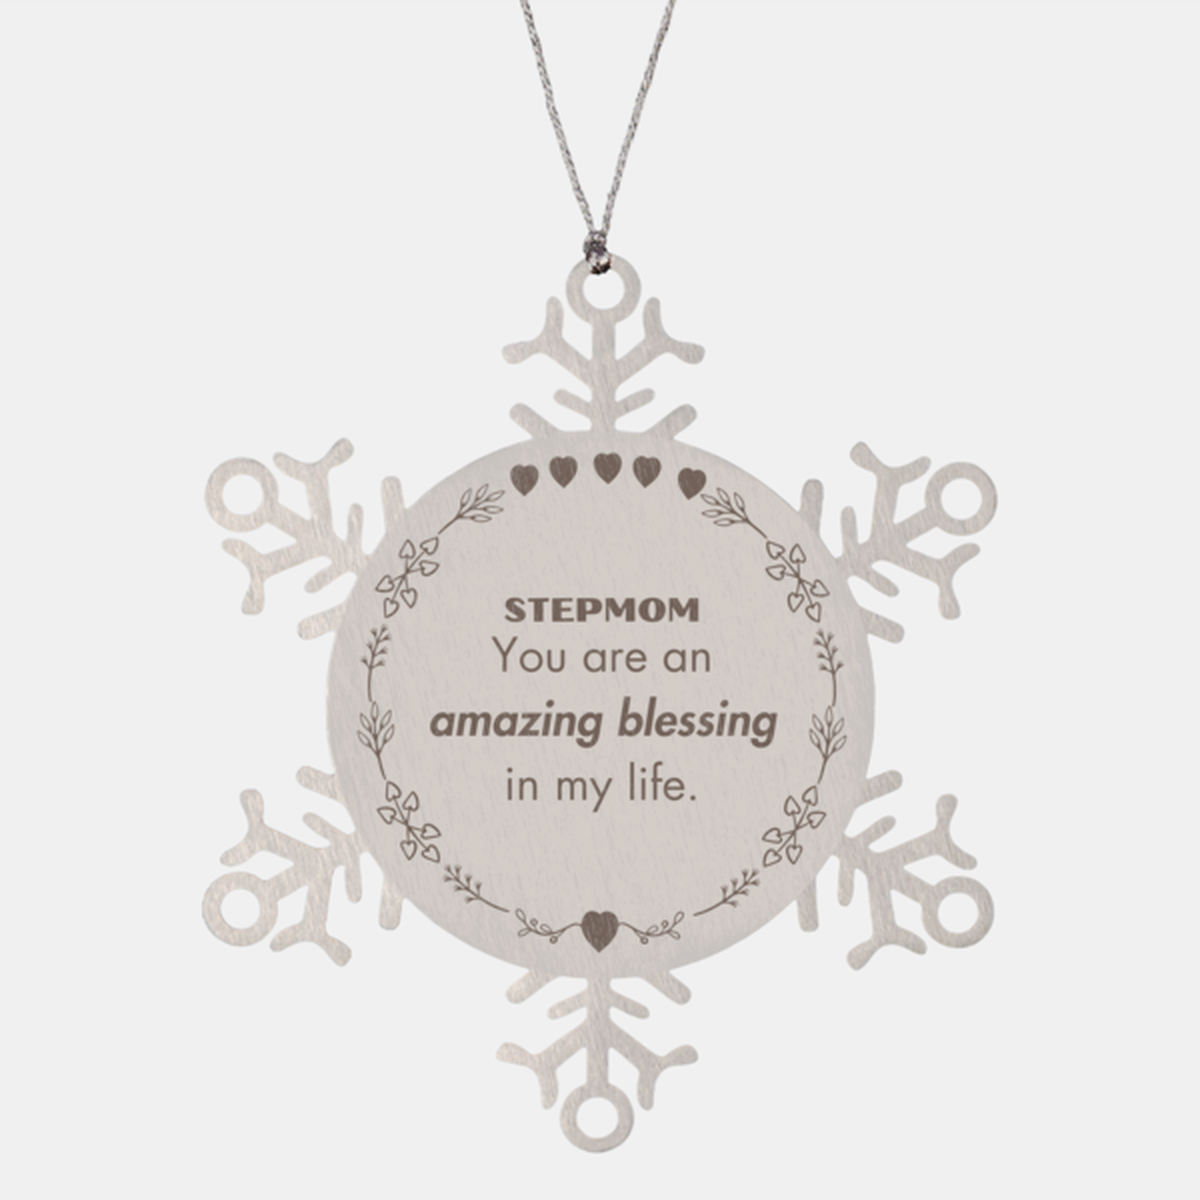 Stepmom Snowflake Ornament, You are an amazing blessing in my life, Thank You Gifts For Stepmom, Inspirational Birthday Christmas Unique Gifts For Stepmom